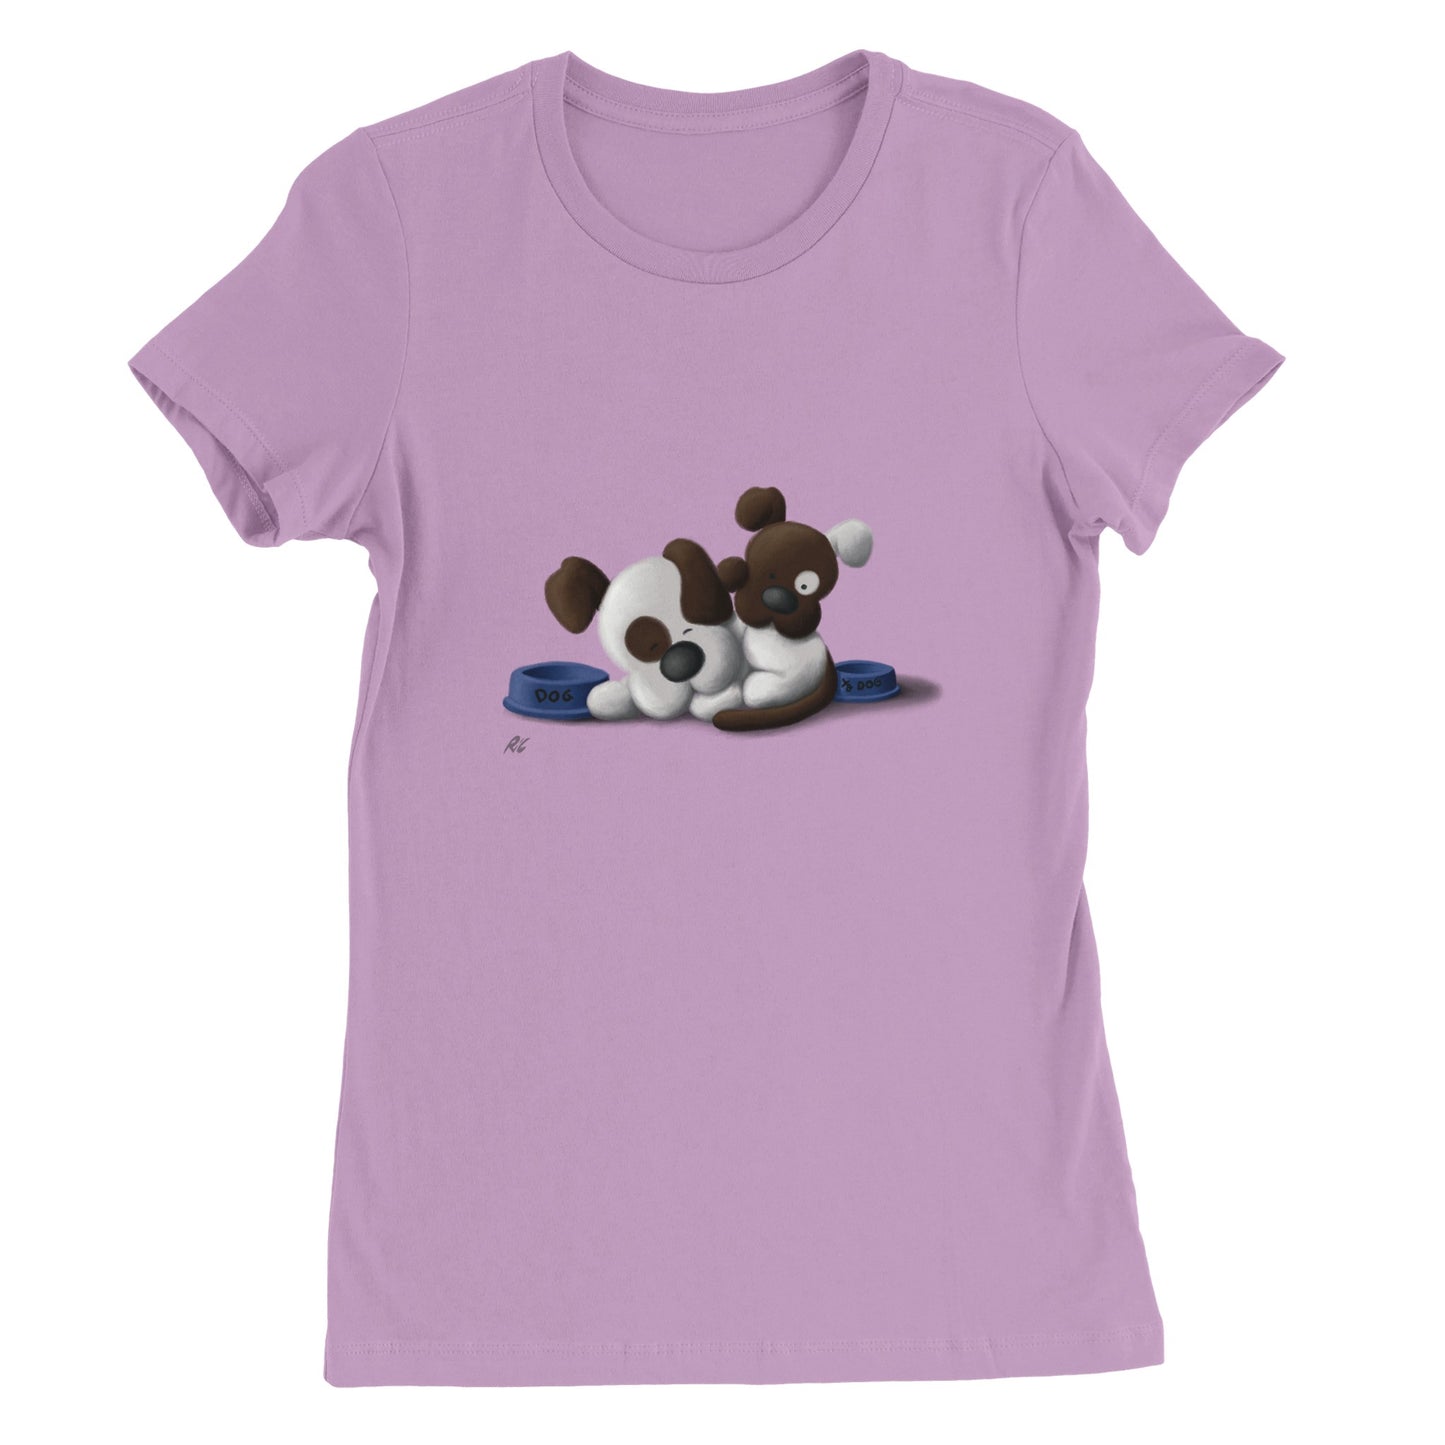 "Wake up Dad, it's time for Dinner!" - Premium Womens Crewneck T-shirt